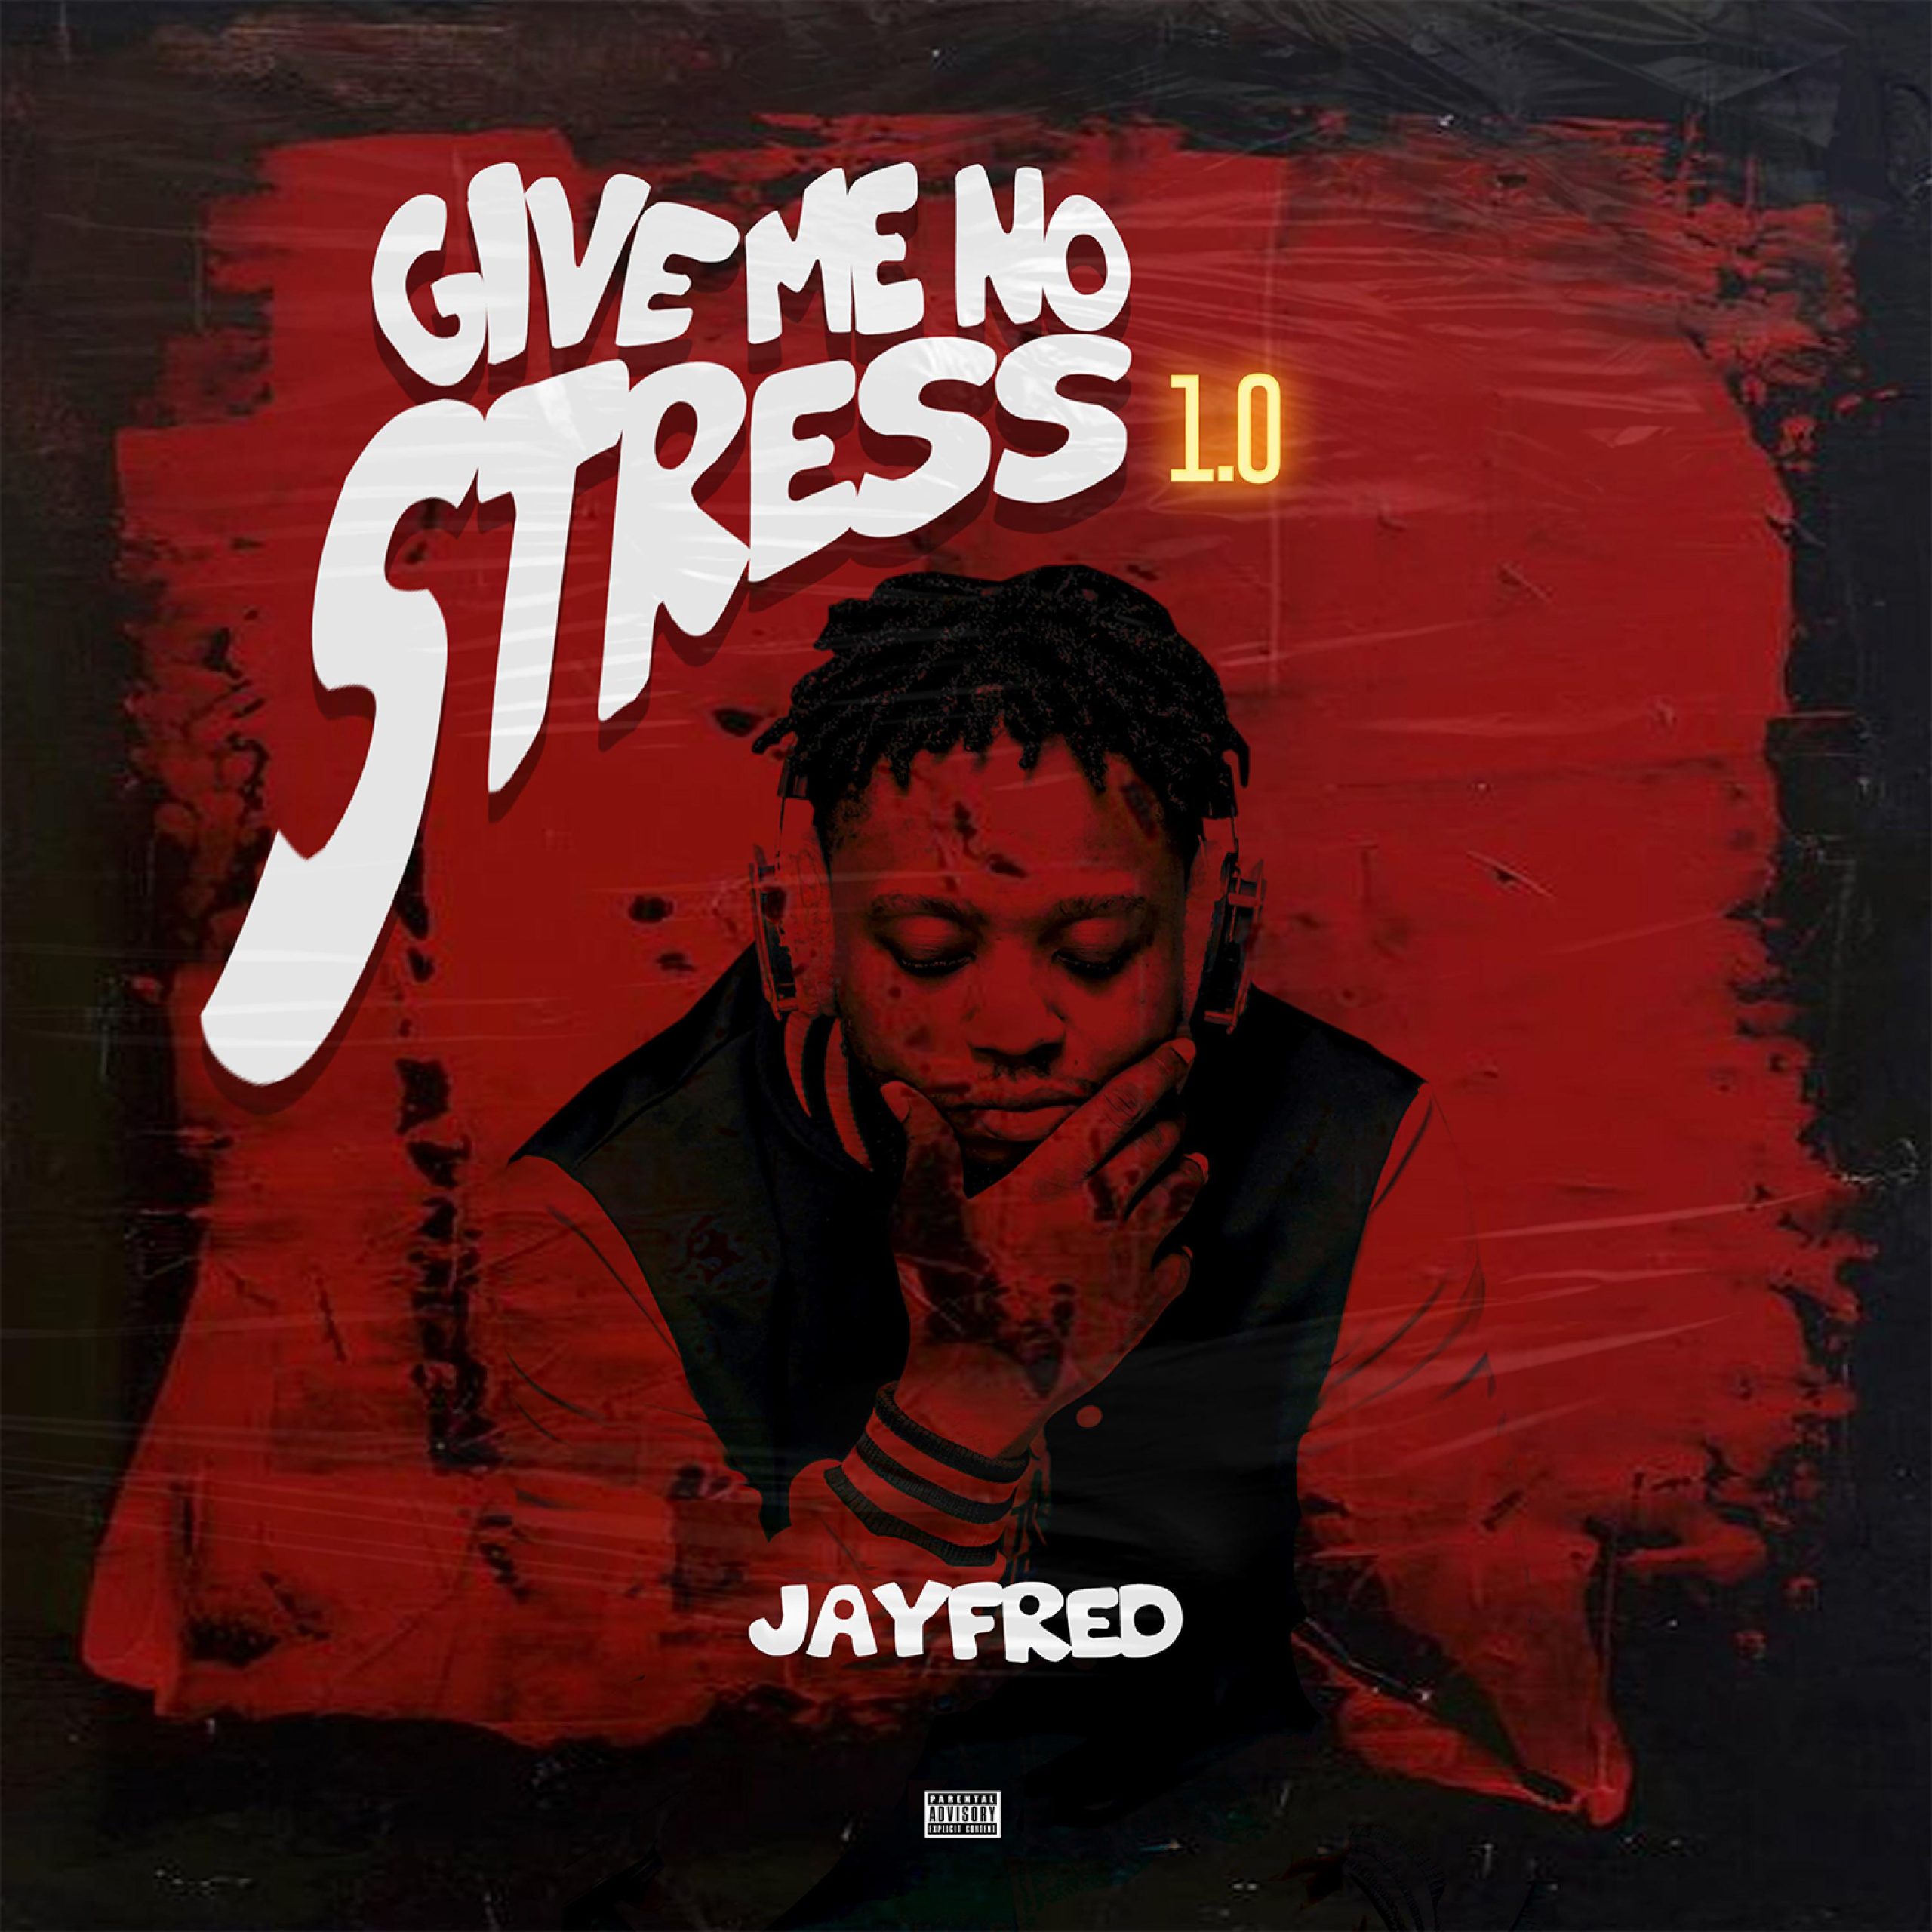 Download JayFred Give Me No Stress 1.0 Album scaled